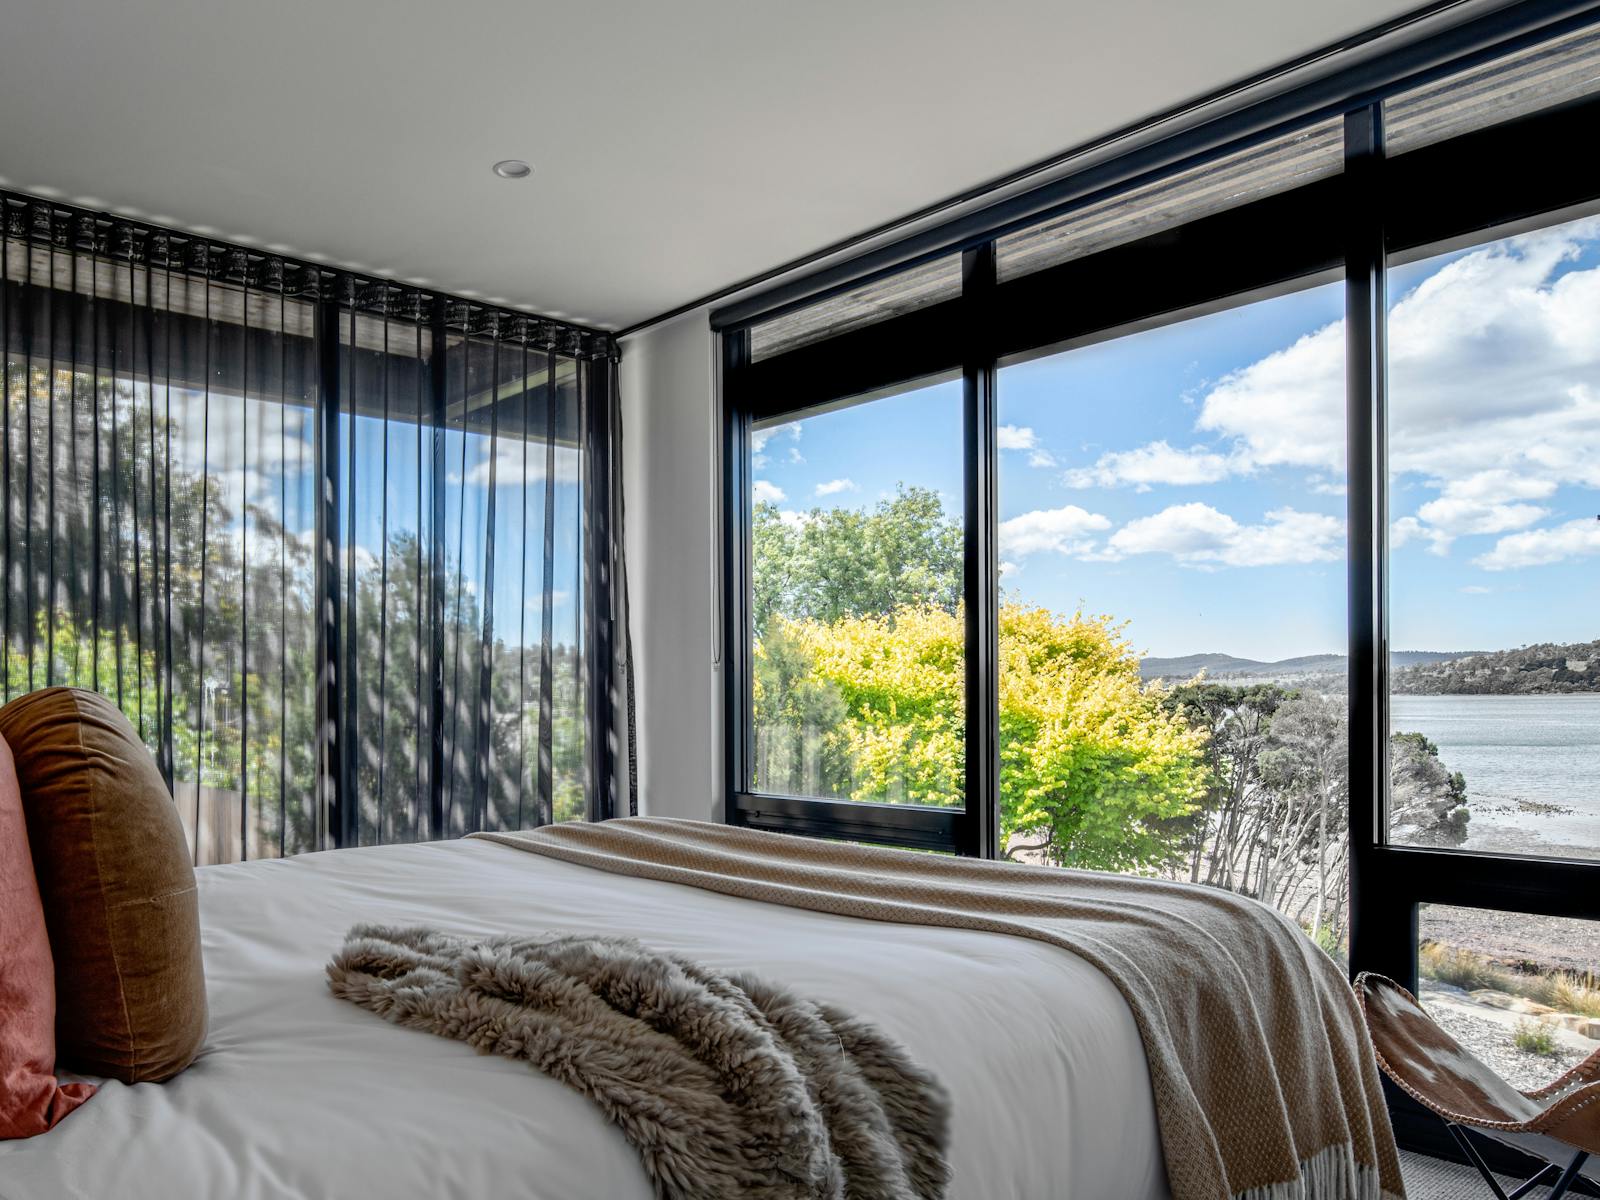 Bedroom 2 is orientated so you wake up in the morning looking at the stunning river views